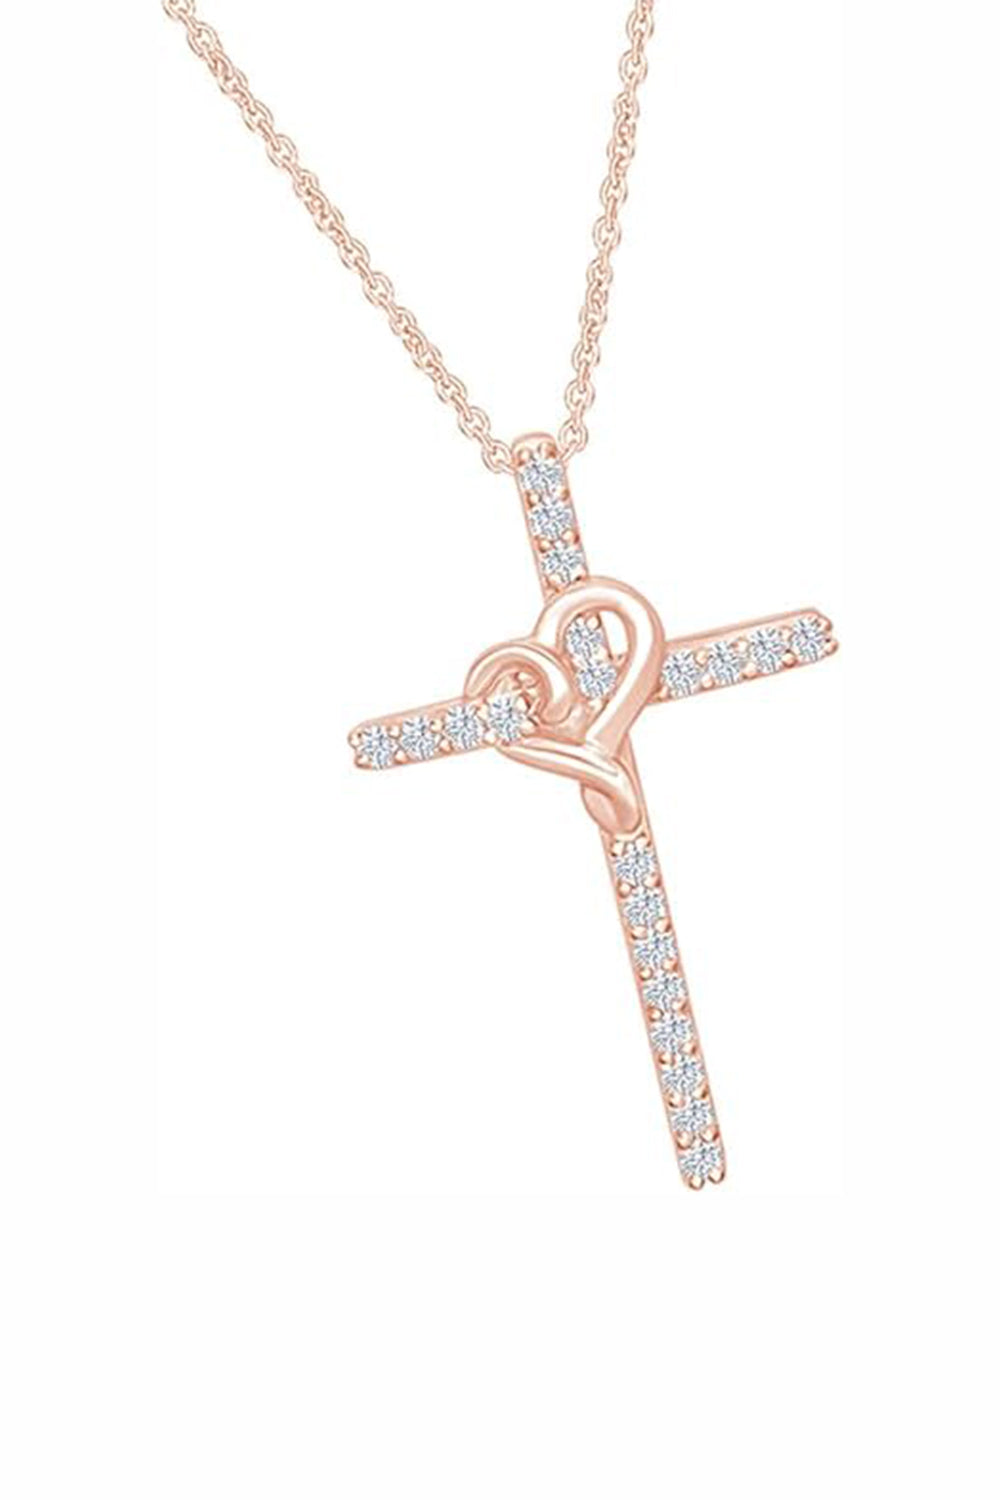 Rose Gold Color Yaathi Heart Cross Pendant Necklace, Religious Pendant